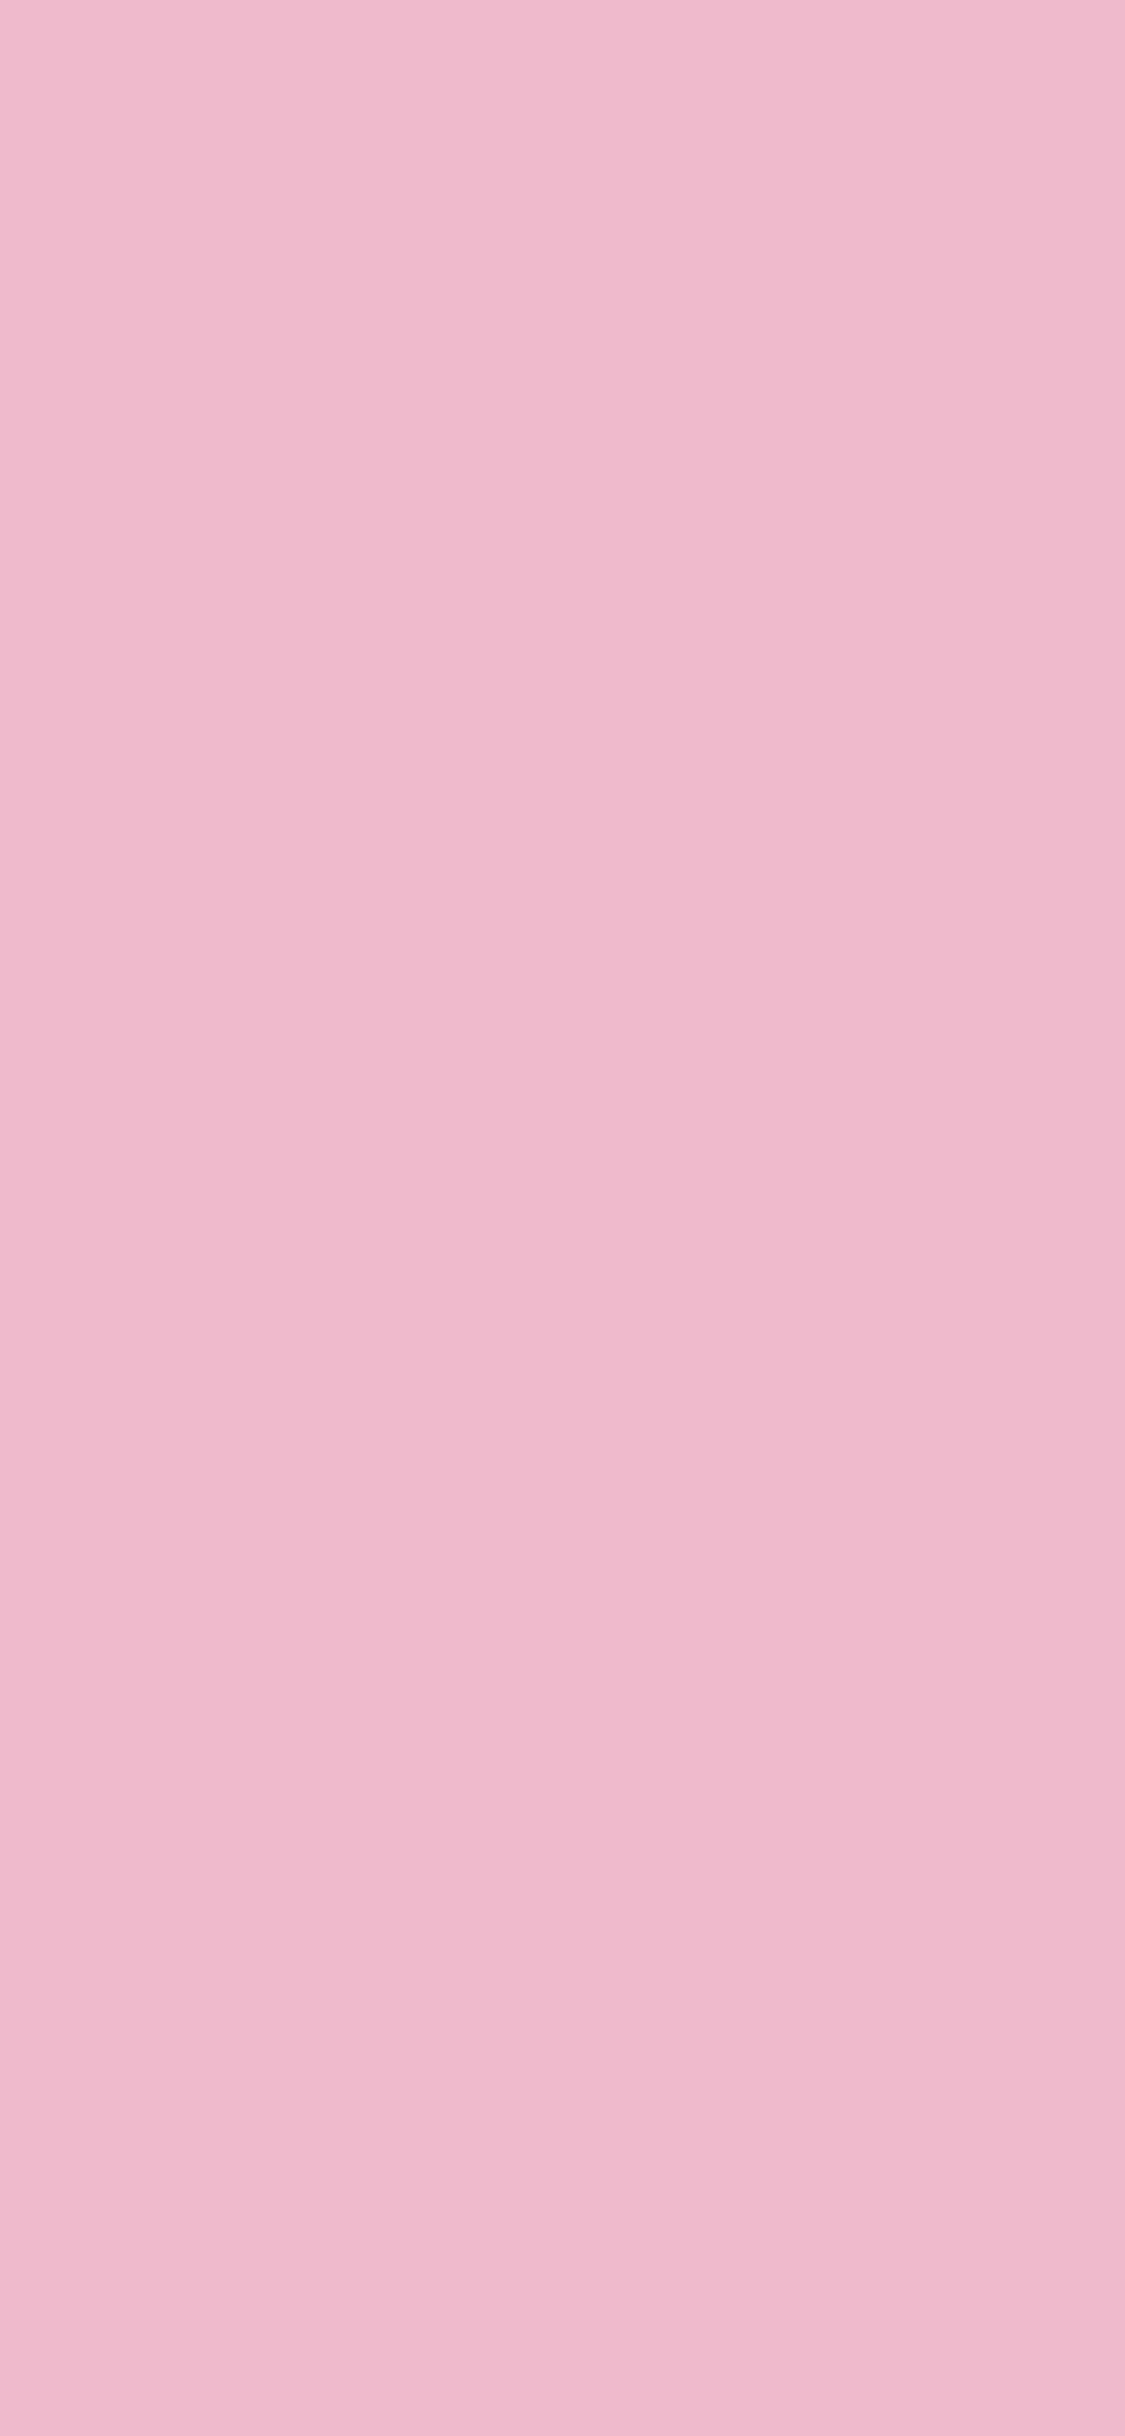 1125x2436 Cameo Pink Solid Color Background